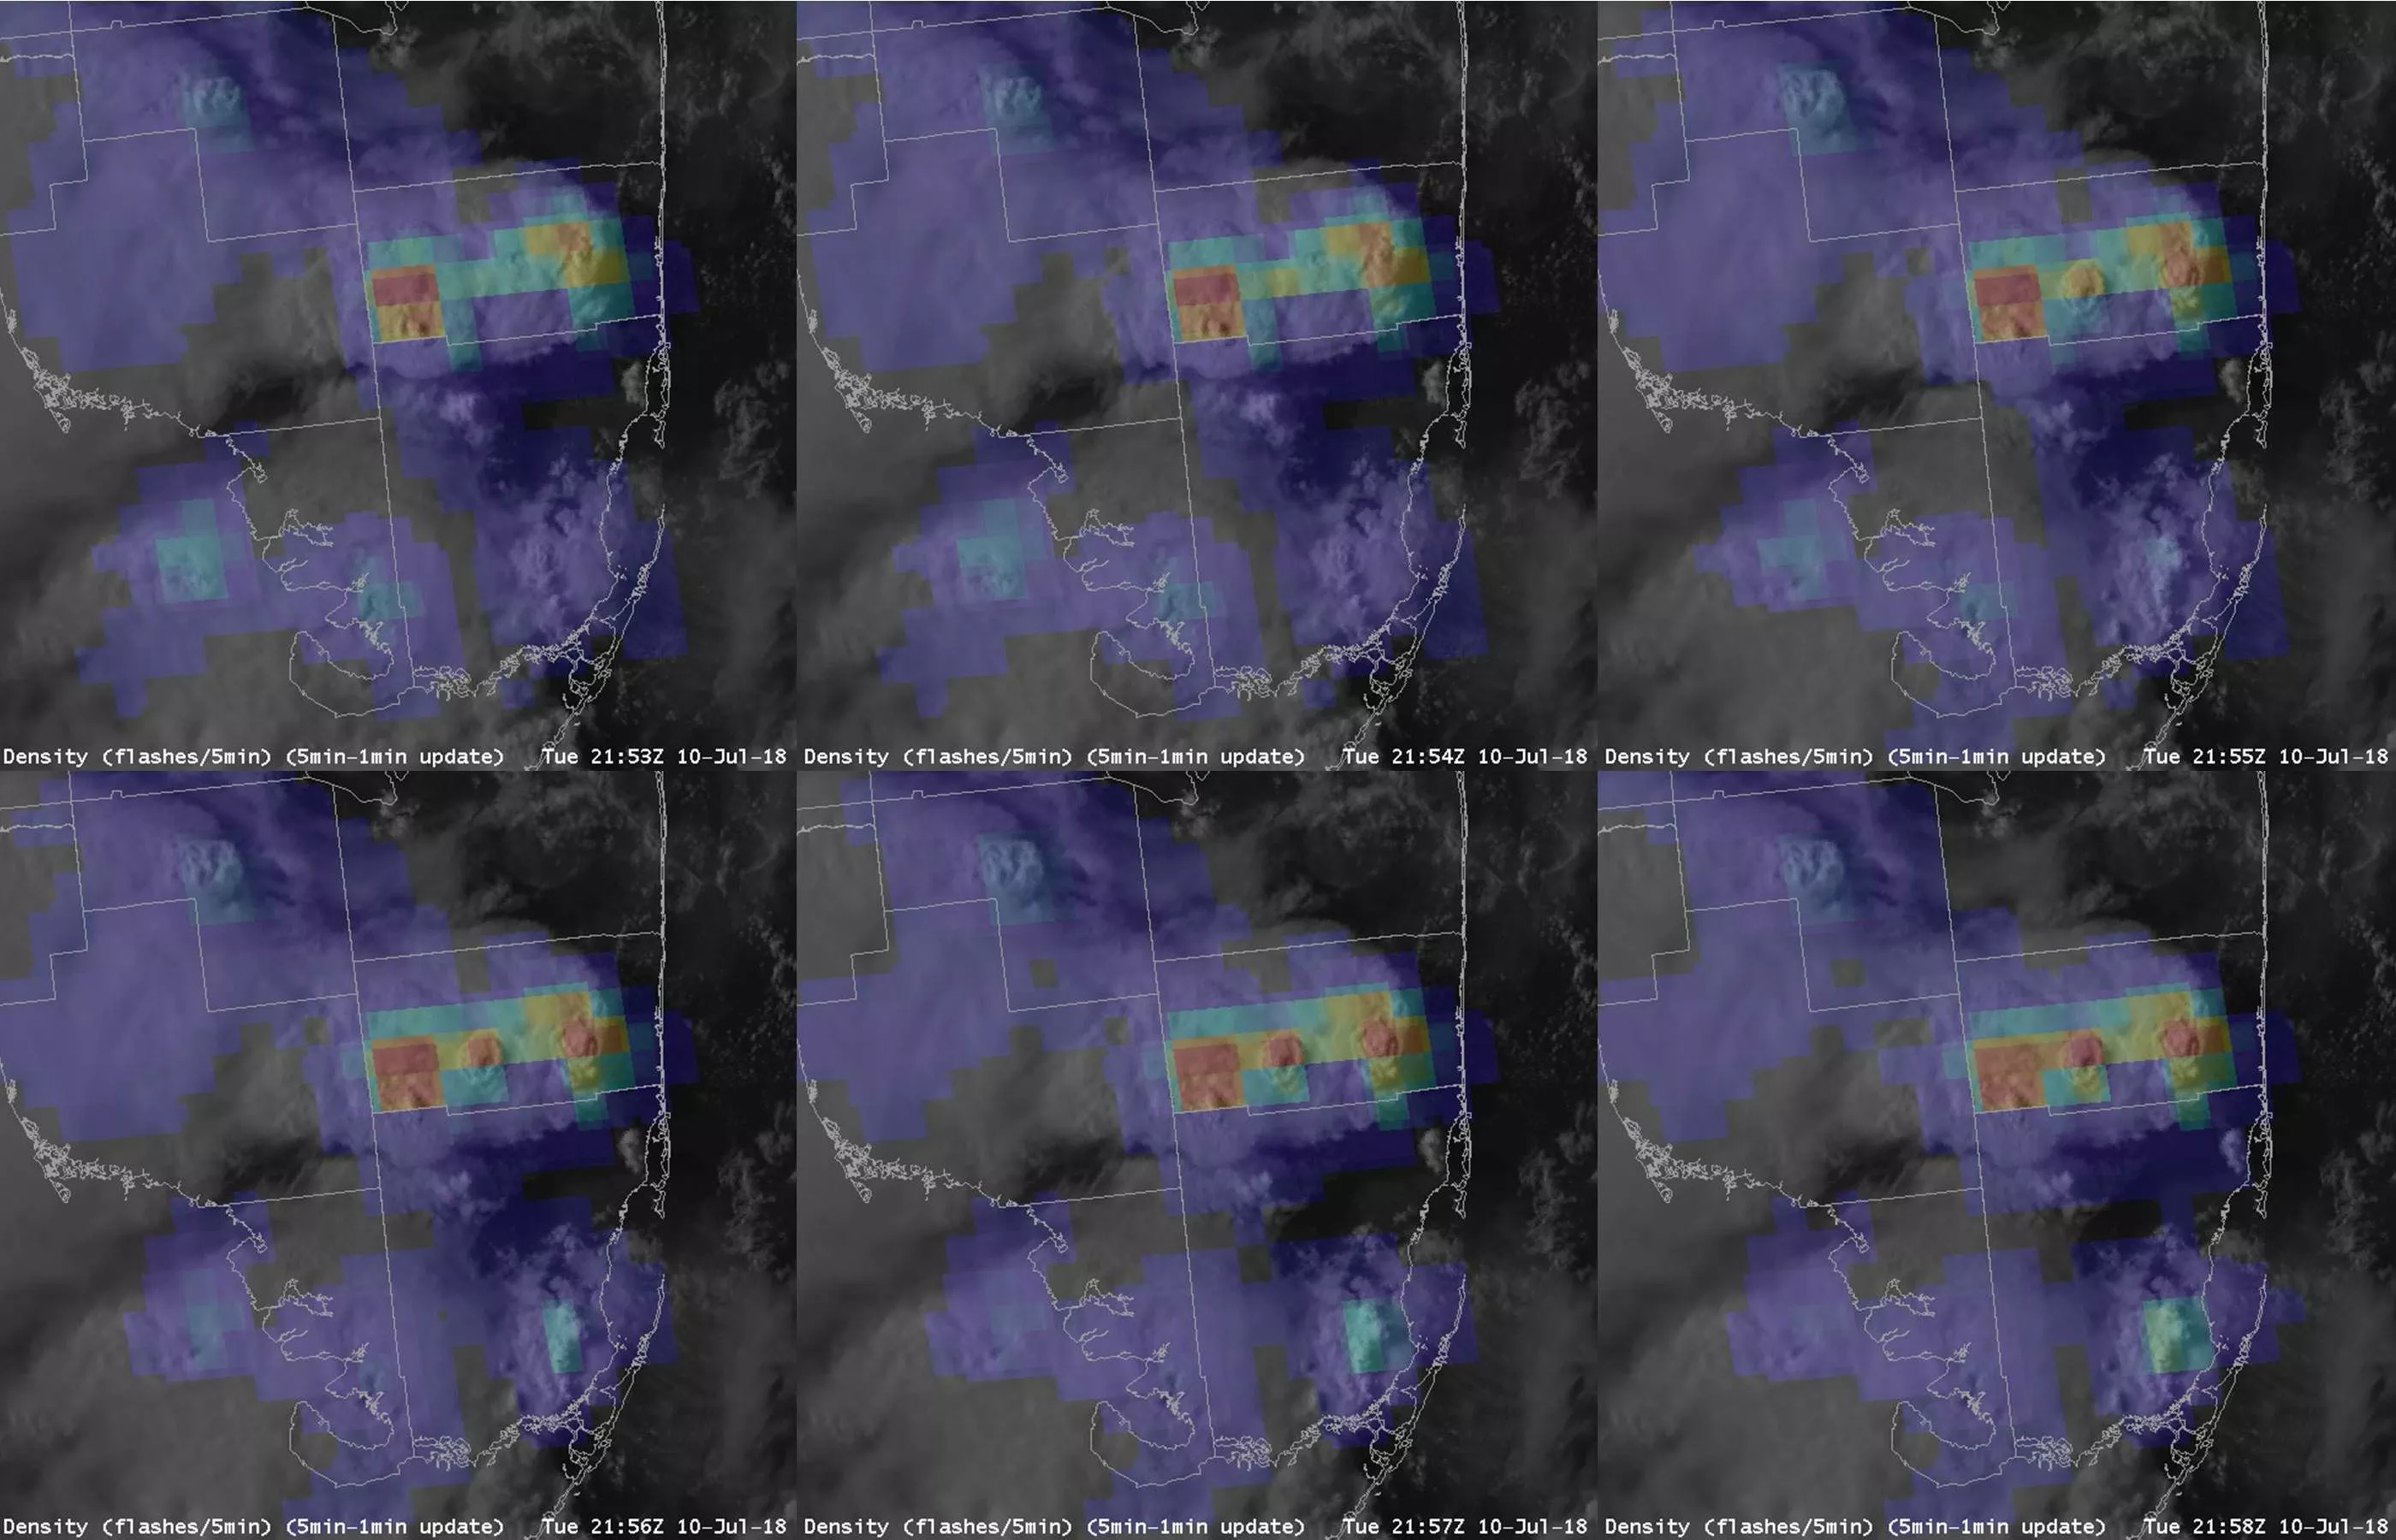 Image of GOES East imagery shows the number of lightning flashes per minute over South Florida 